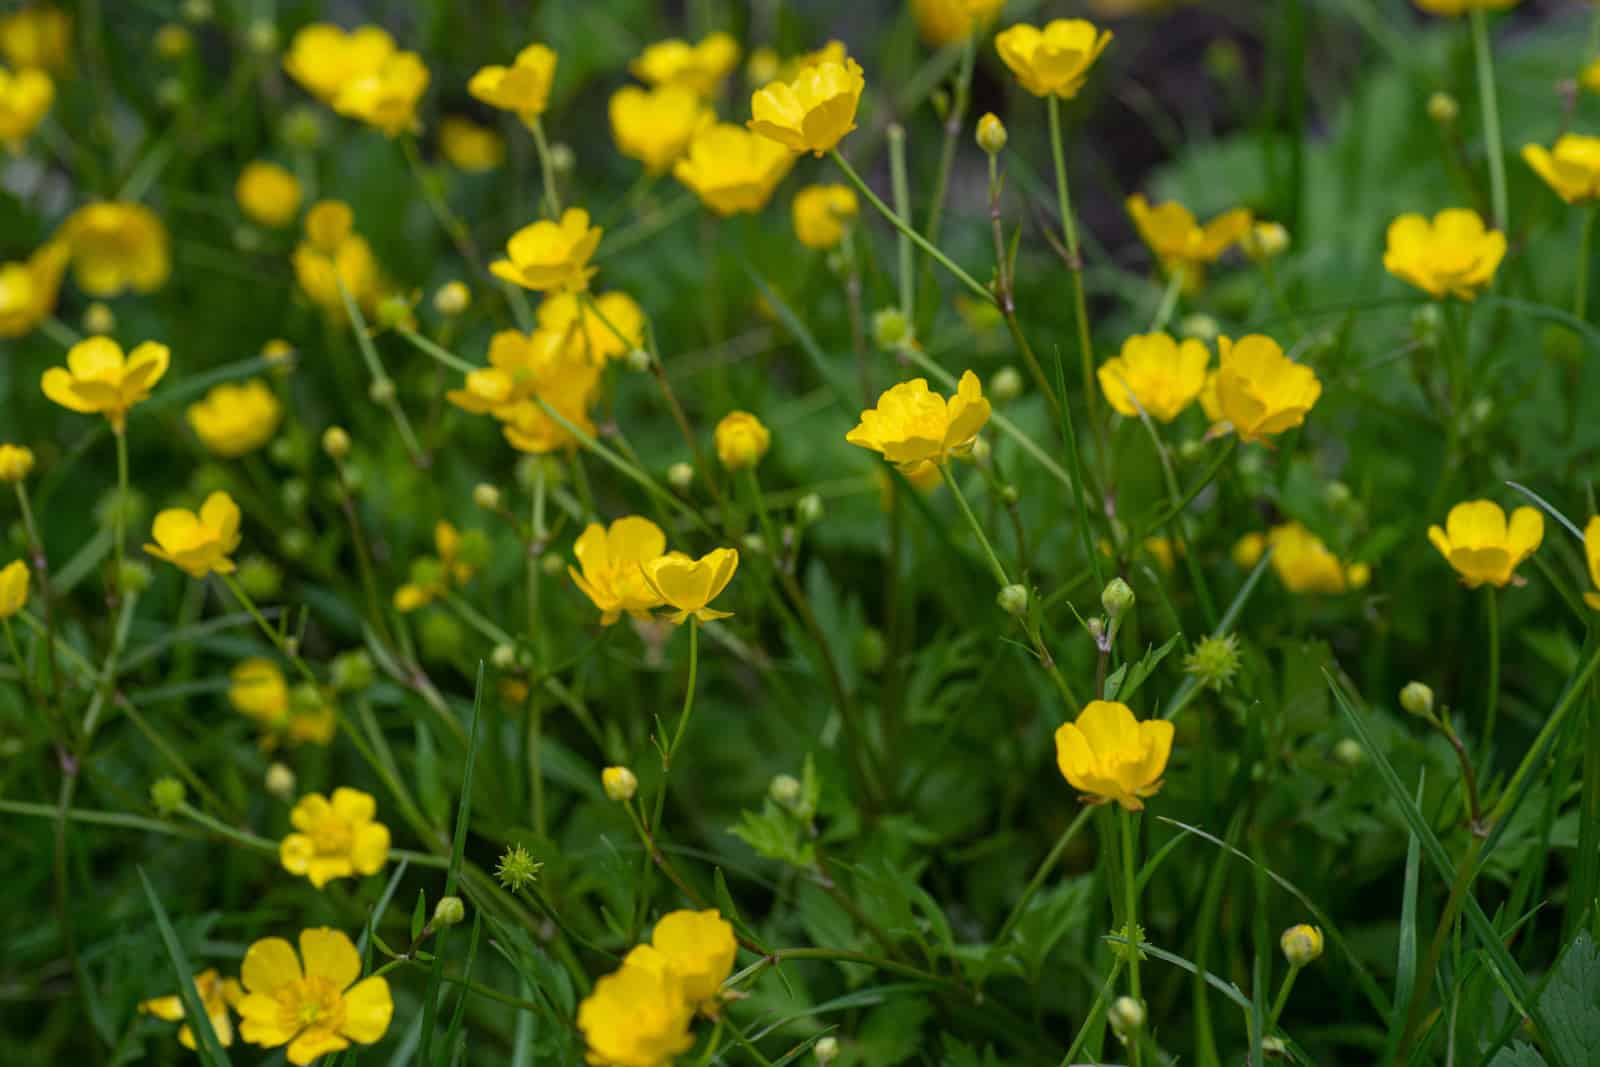 Ranunculus repens or the creeping buttercup